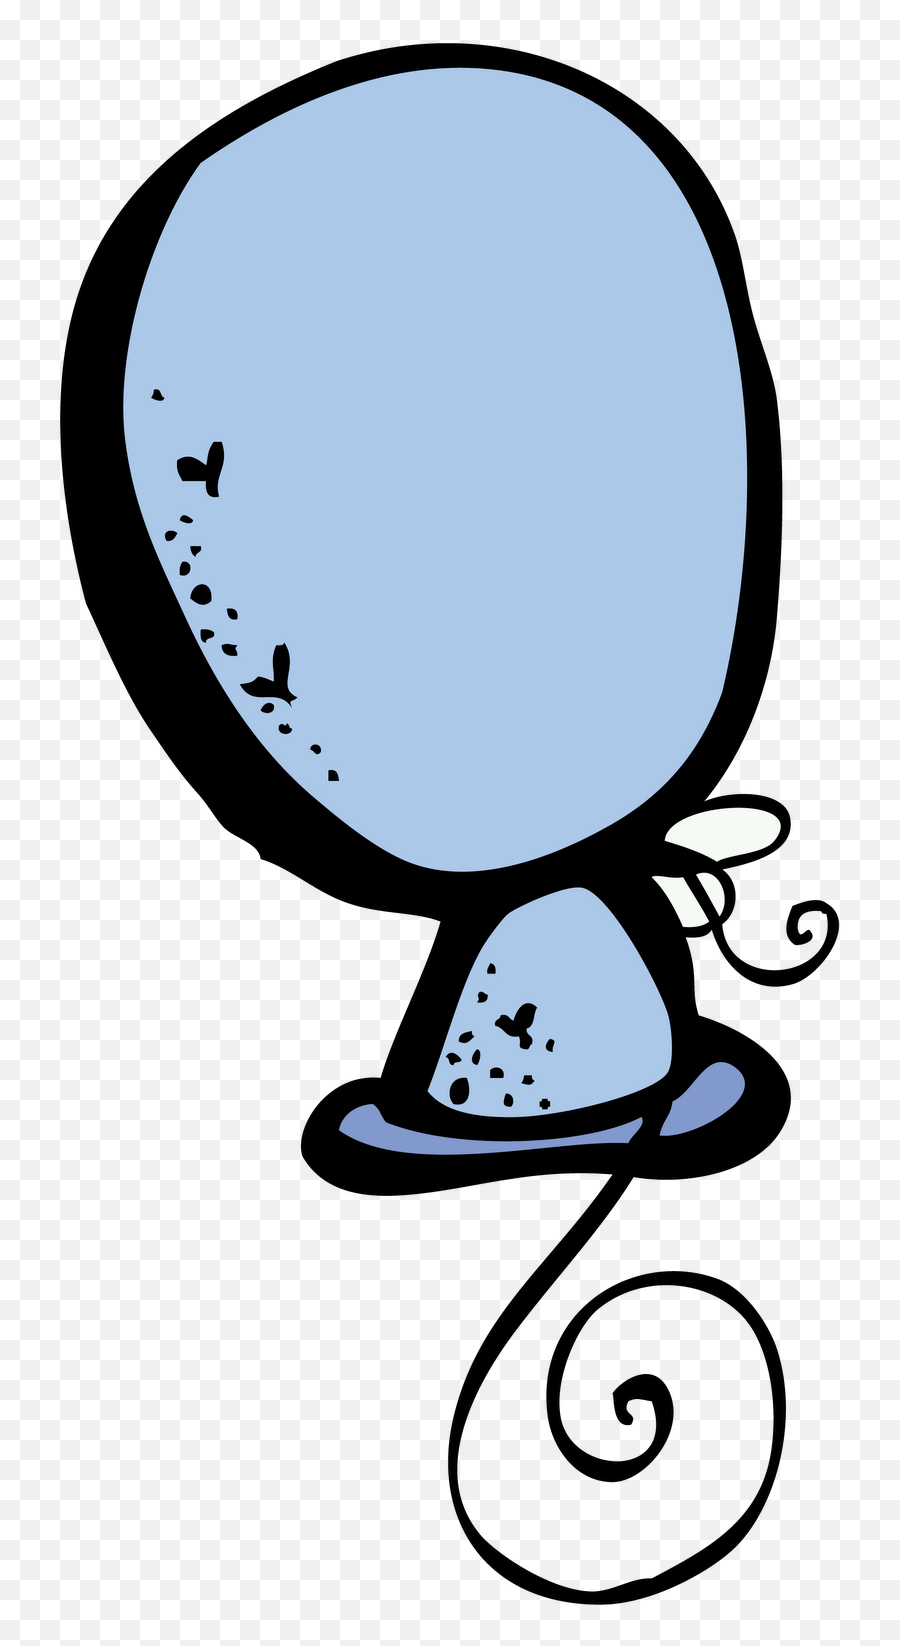 Blue Balloon As A Picture For Clipart - Melonheadz Balloon Clipart Emoji,Blue Balloon Clipart